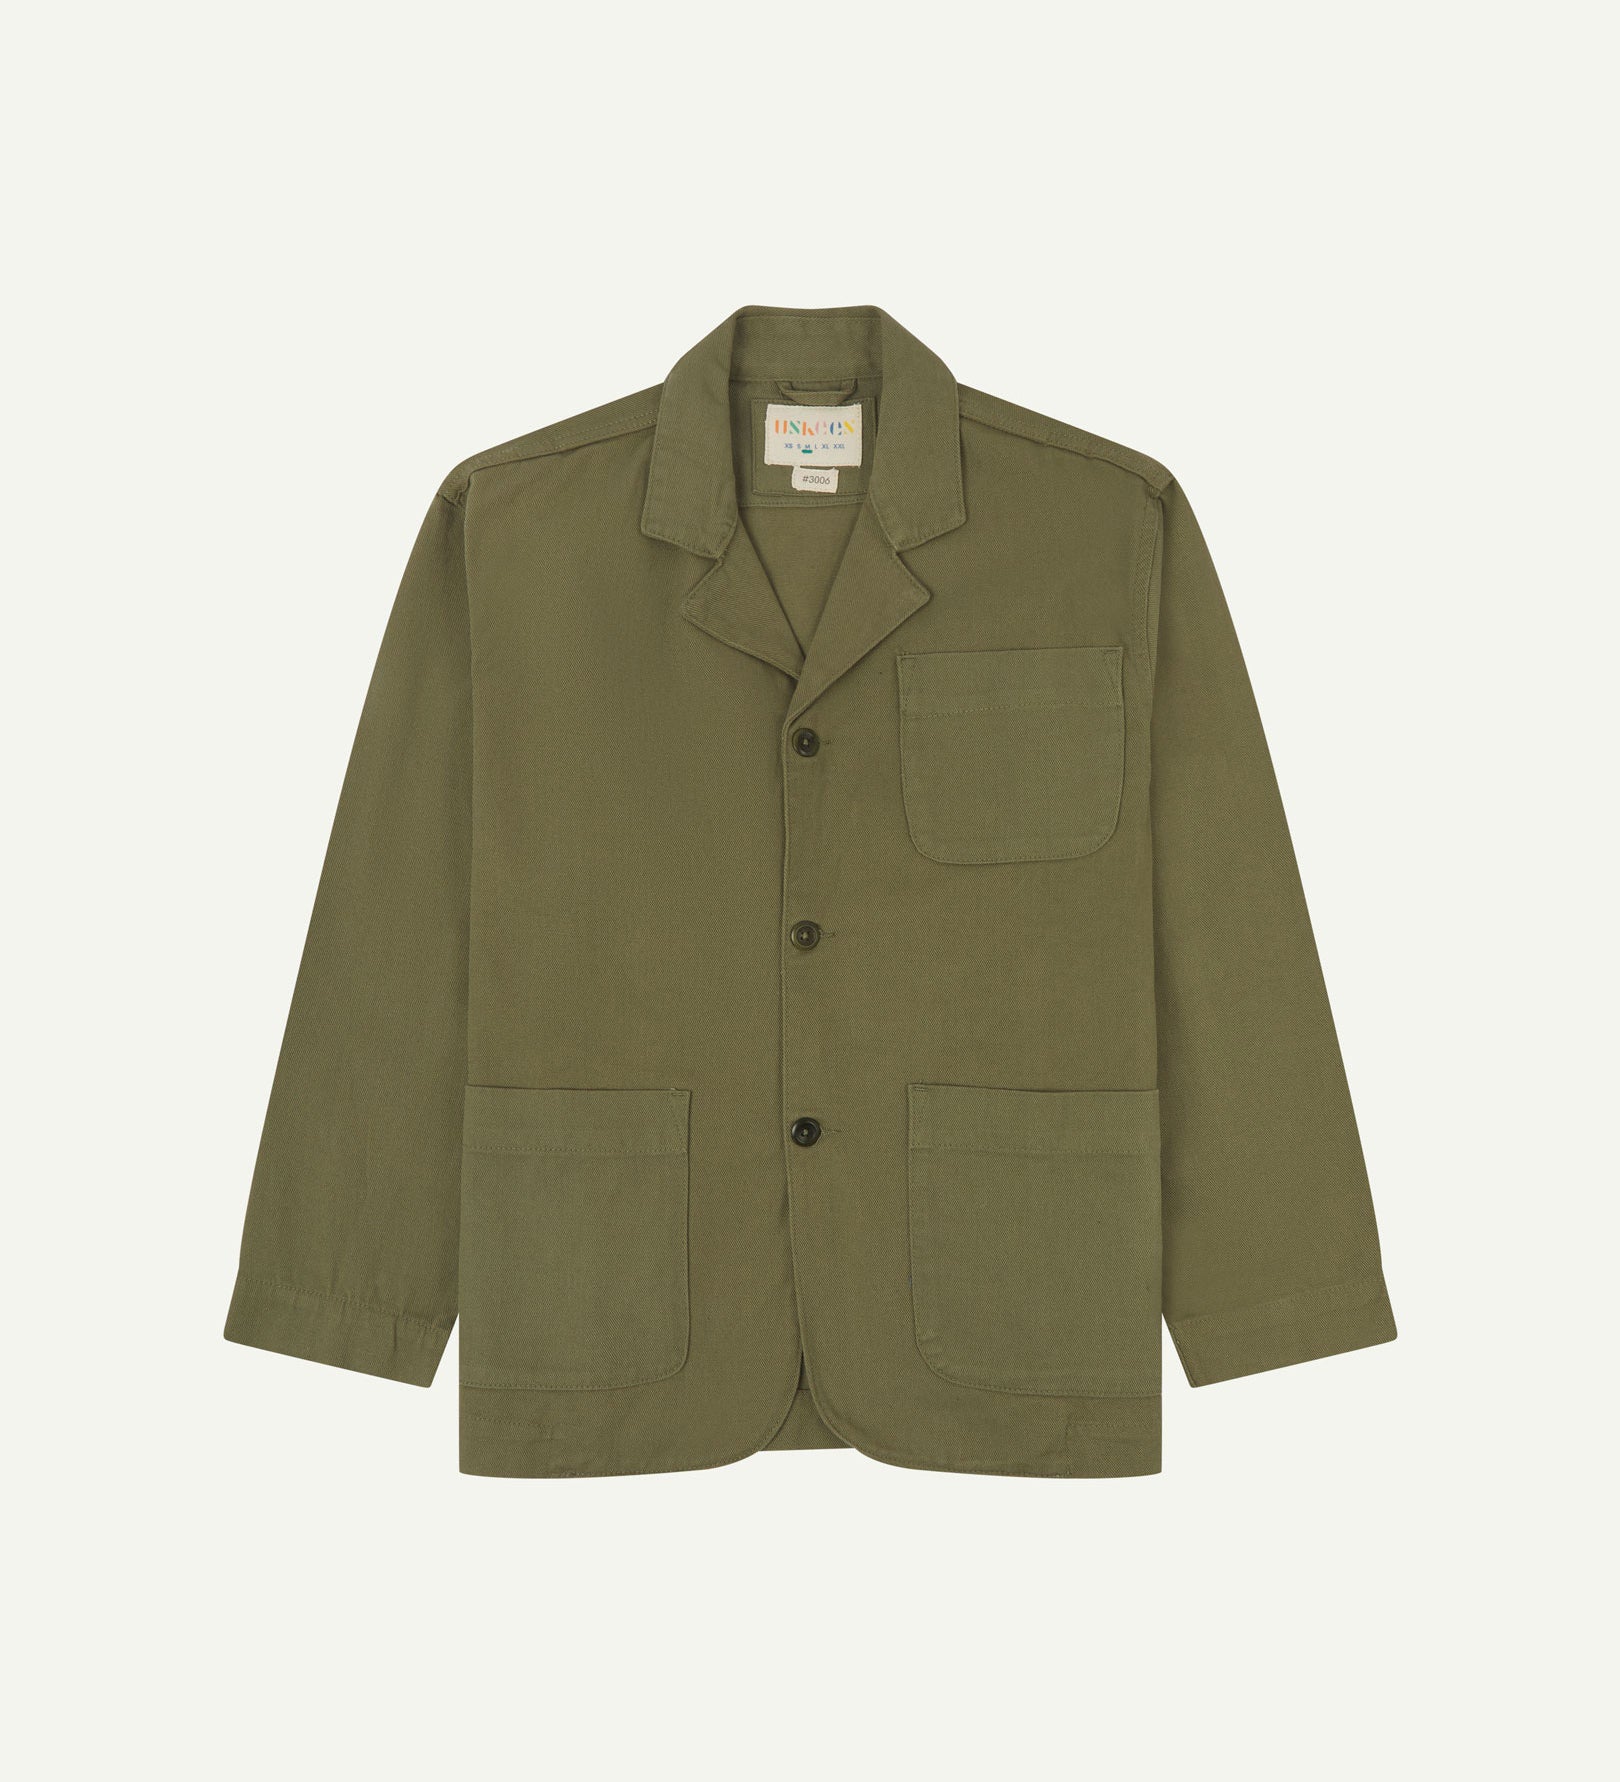 Moss-green buttoned organic cotton-drill blazer from Uskees with clear view of three patch pockets and Uskees branding label.